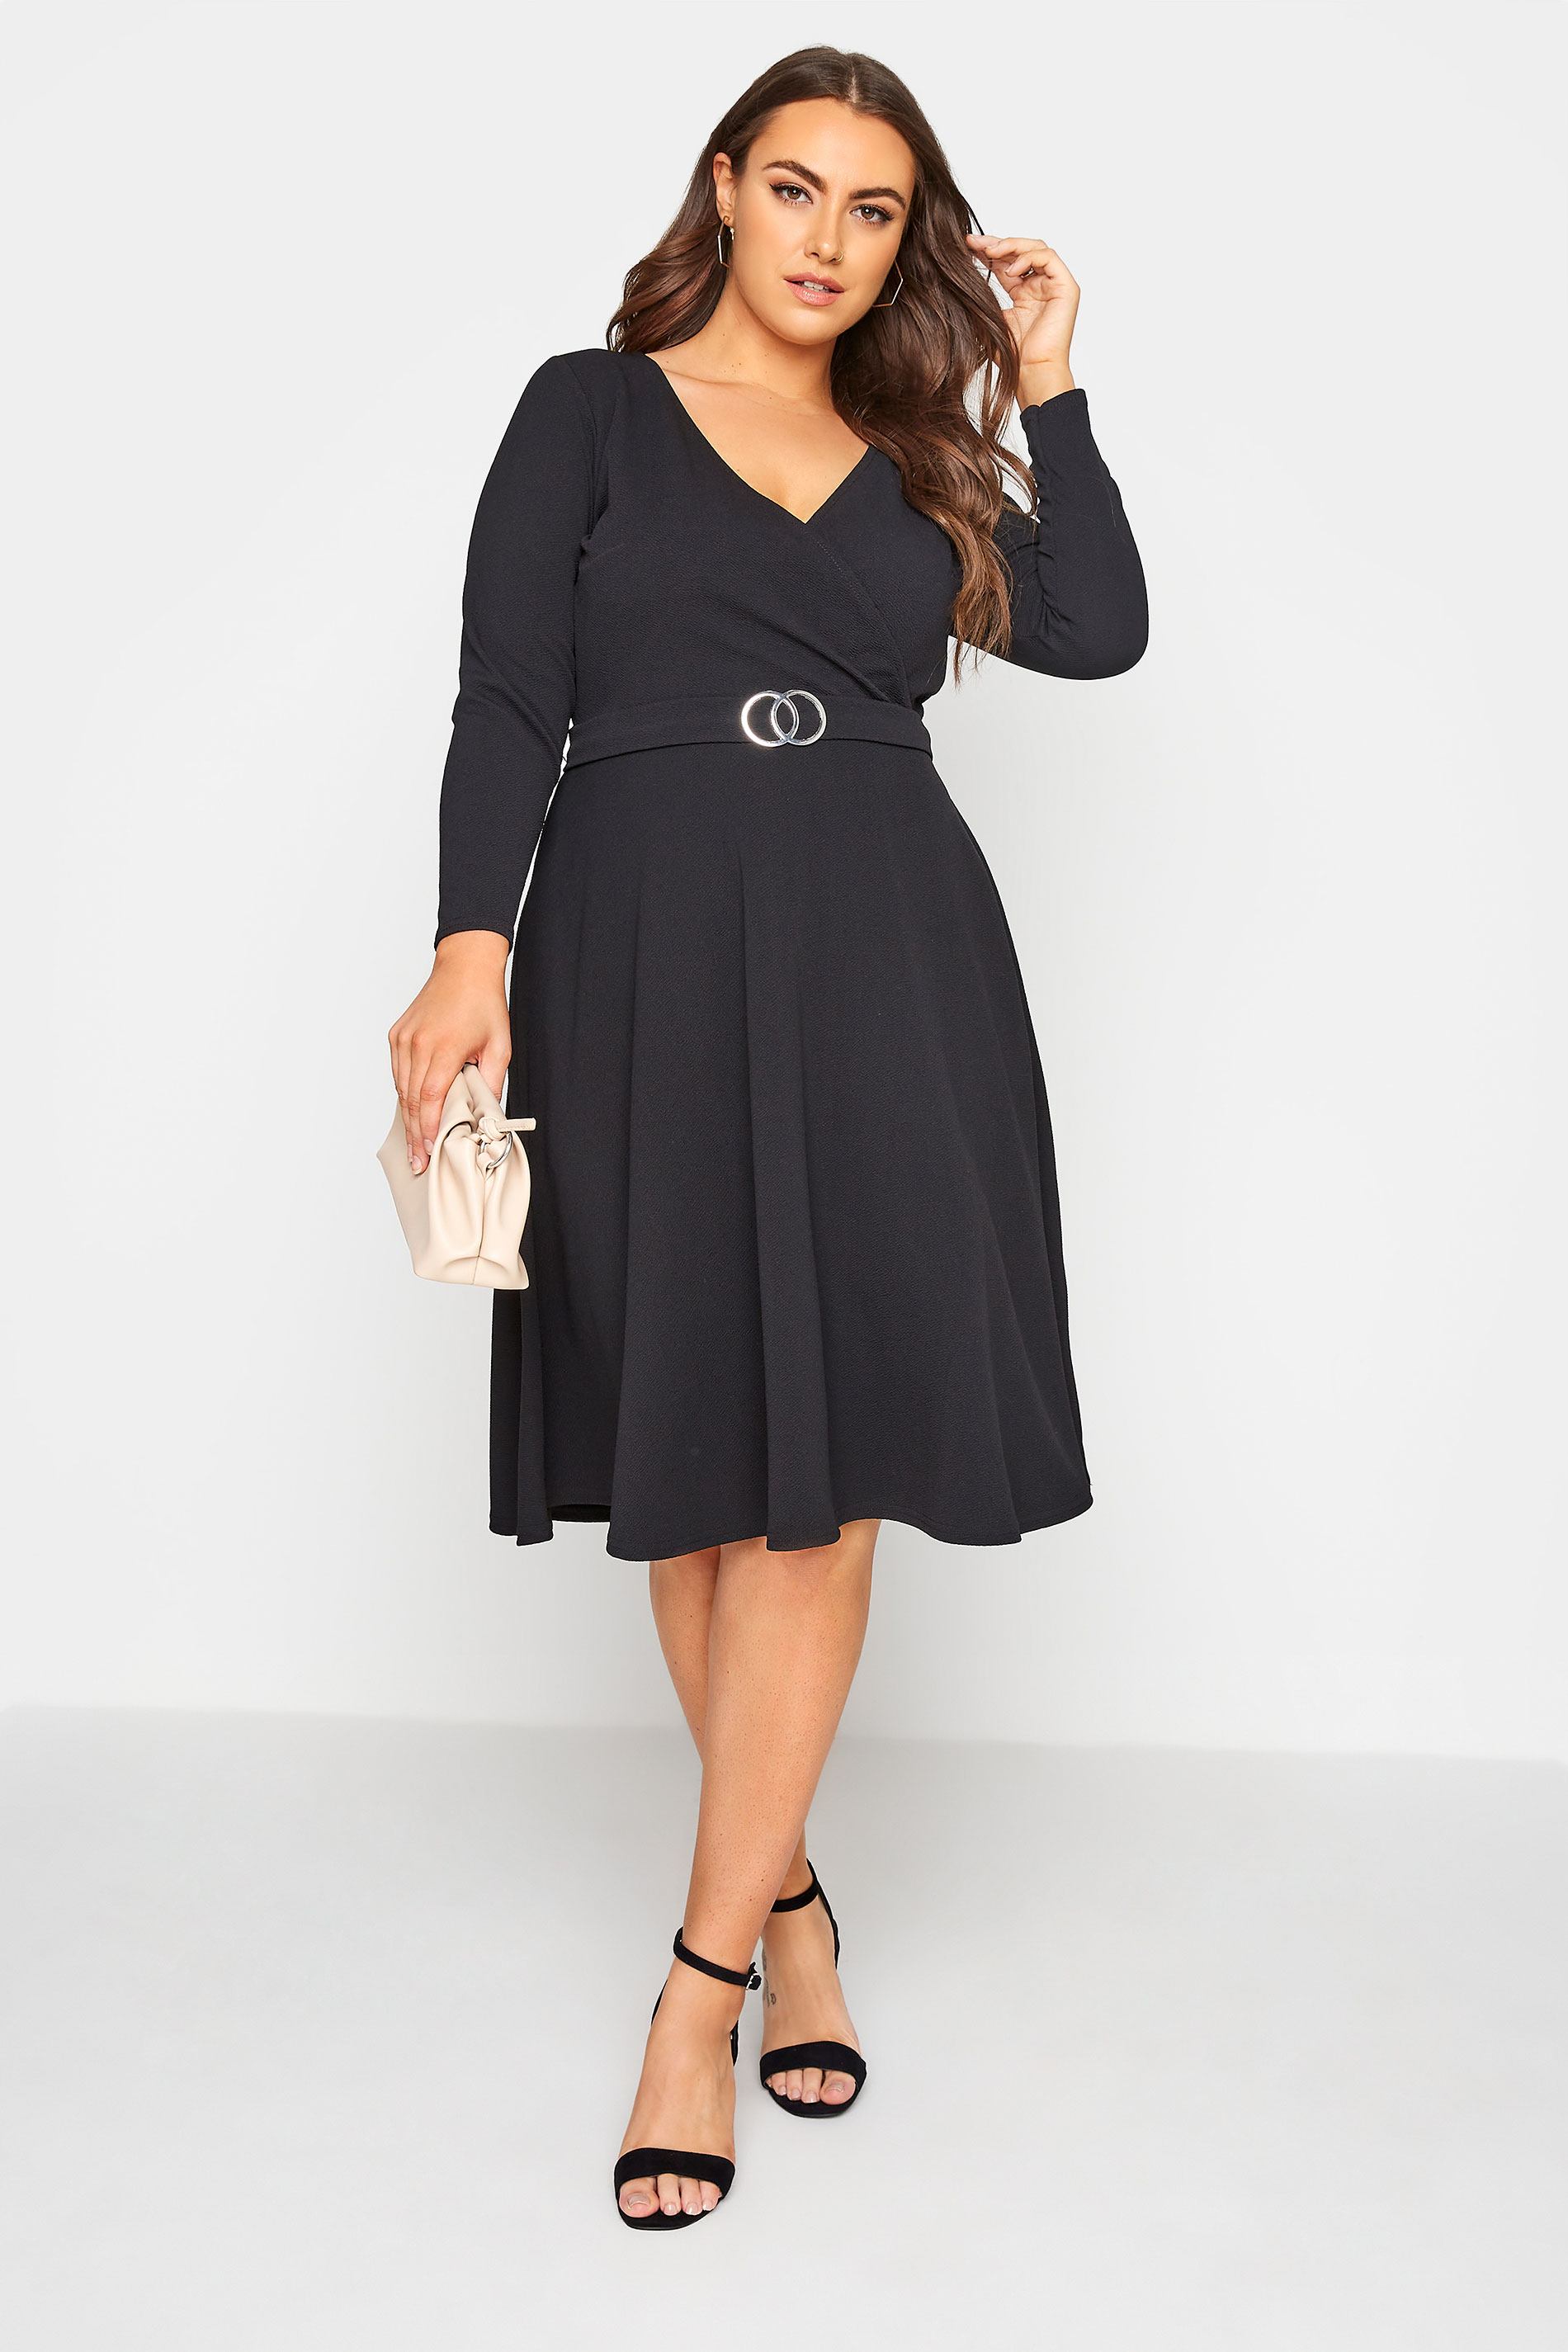 Robes Grande Taille Grande taille  Robes Noires | YOURS LONDON - Robe Noire Cache-Coeur Manches Longues - KE00915